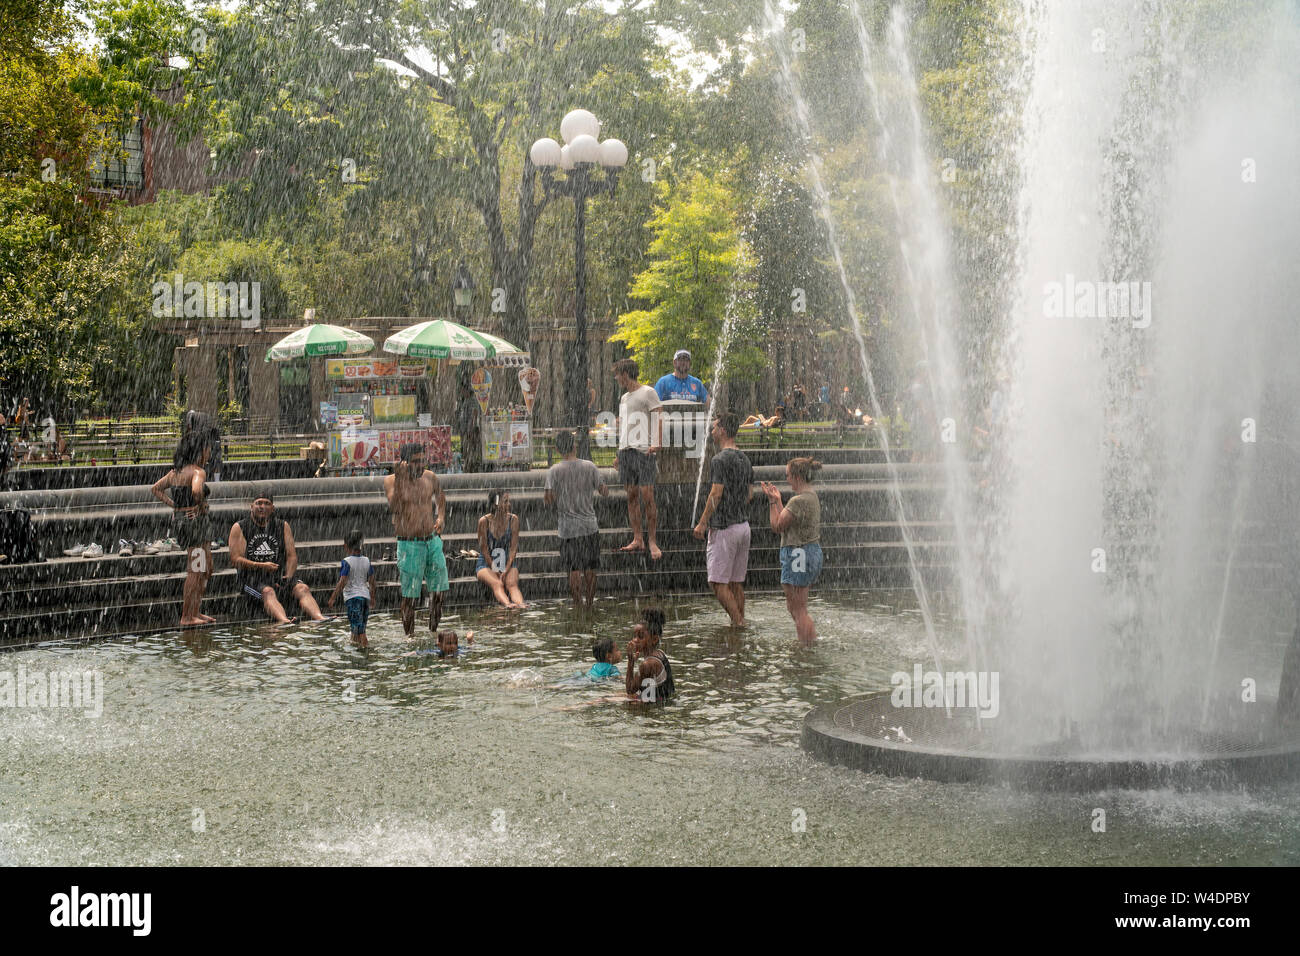 New Yorkers and visitors frolic by the fountain in Washington Square Park in Greenwich Village in New York on Saturday, July 20, 2019. An excessive heat warning is in effect in New York from noon Friday until 8PM Sunday as the oppressive combination of heat and humidity will make it feel like 105 degrees F. (© Richard B. Levine) Stock Photo